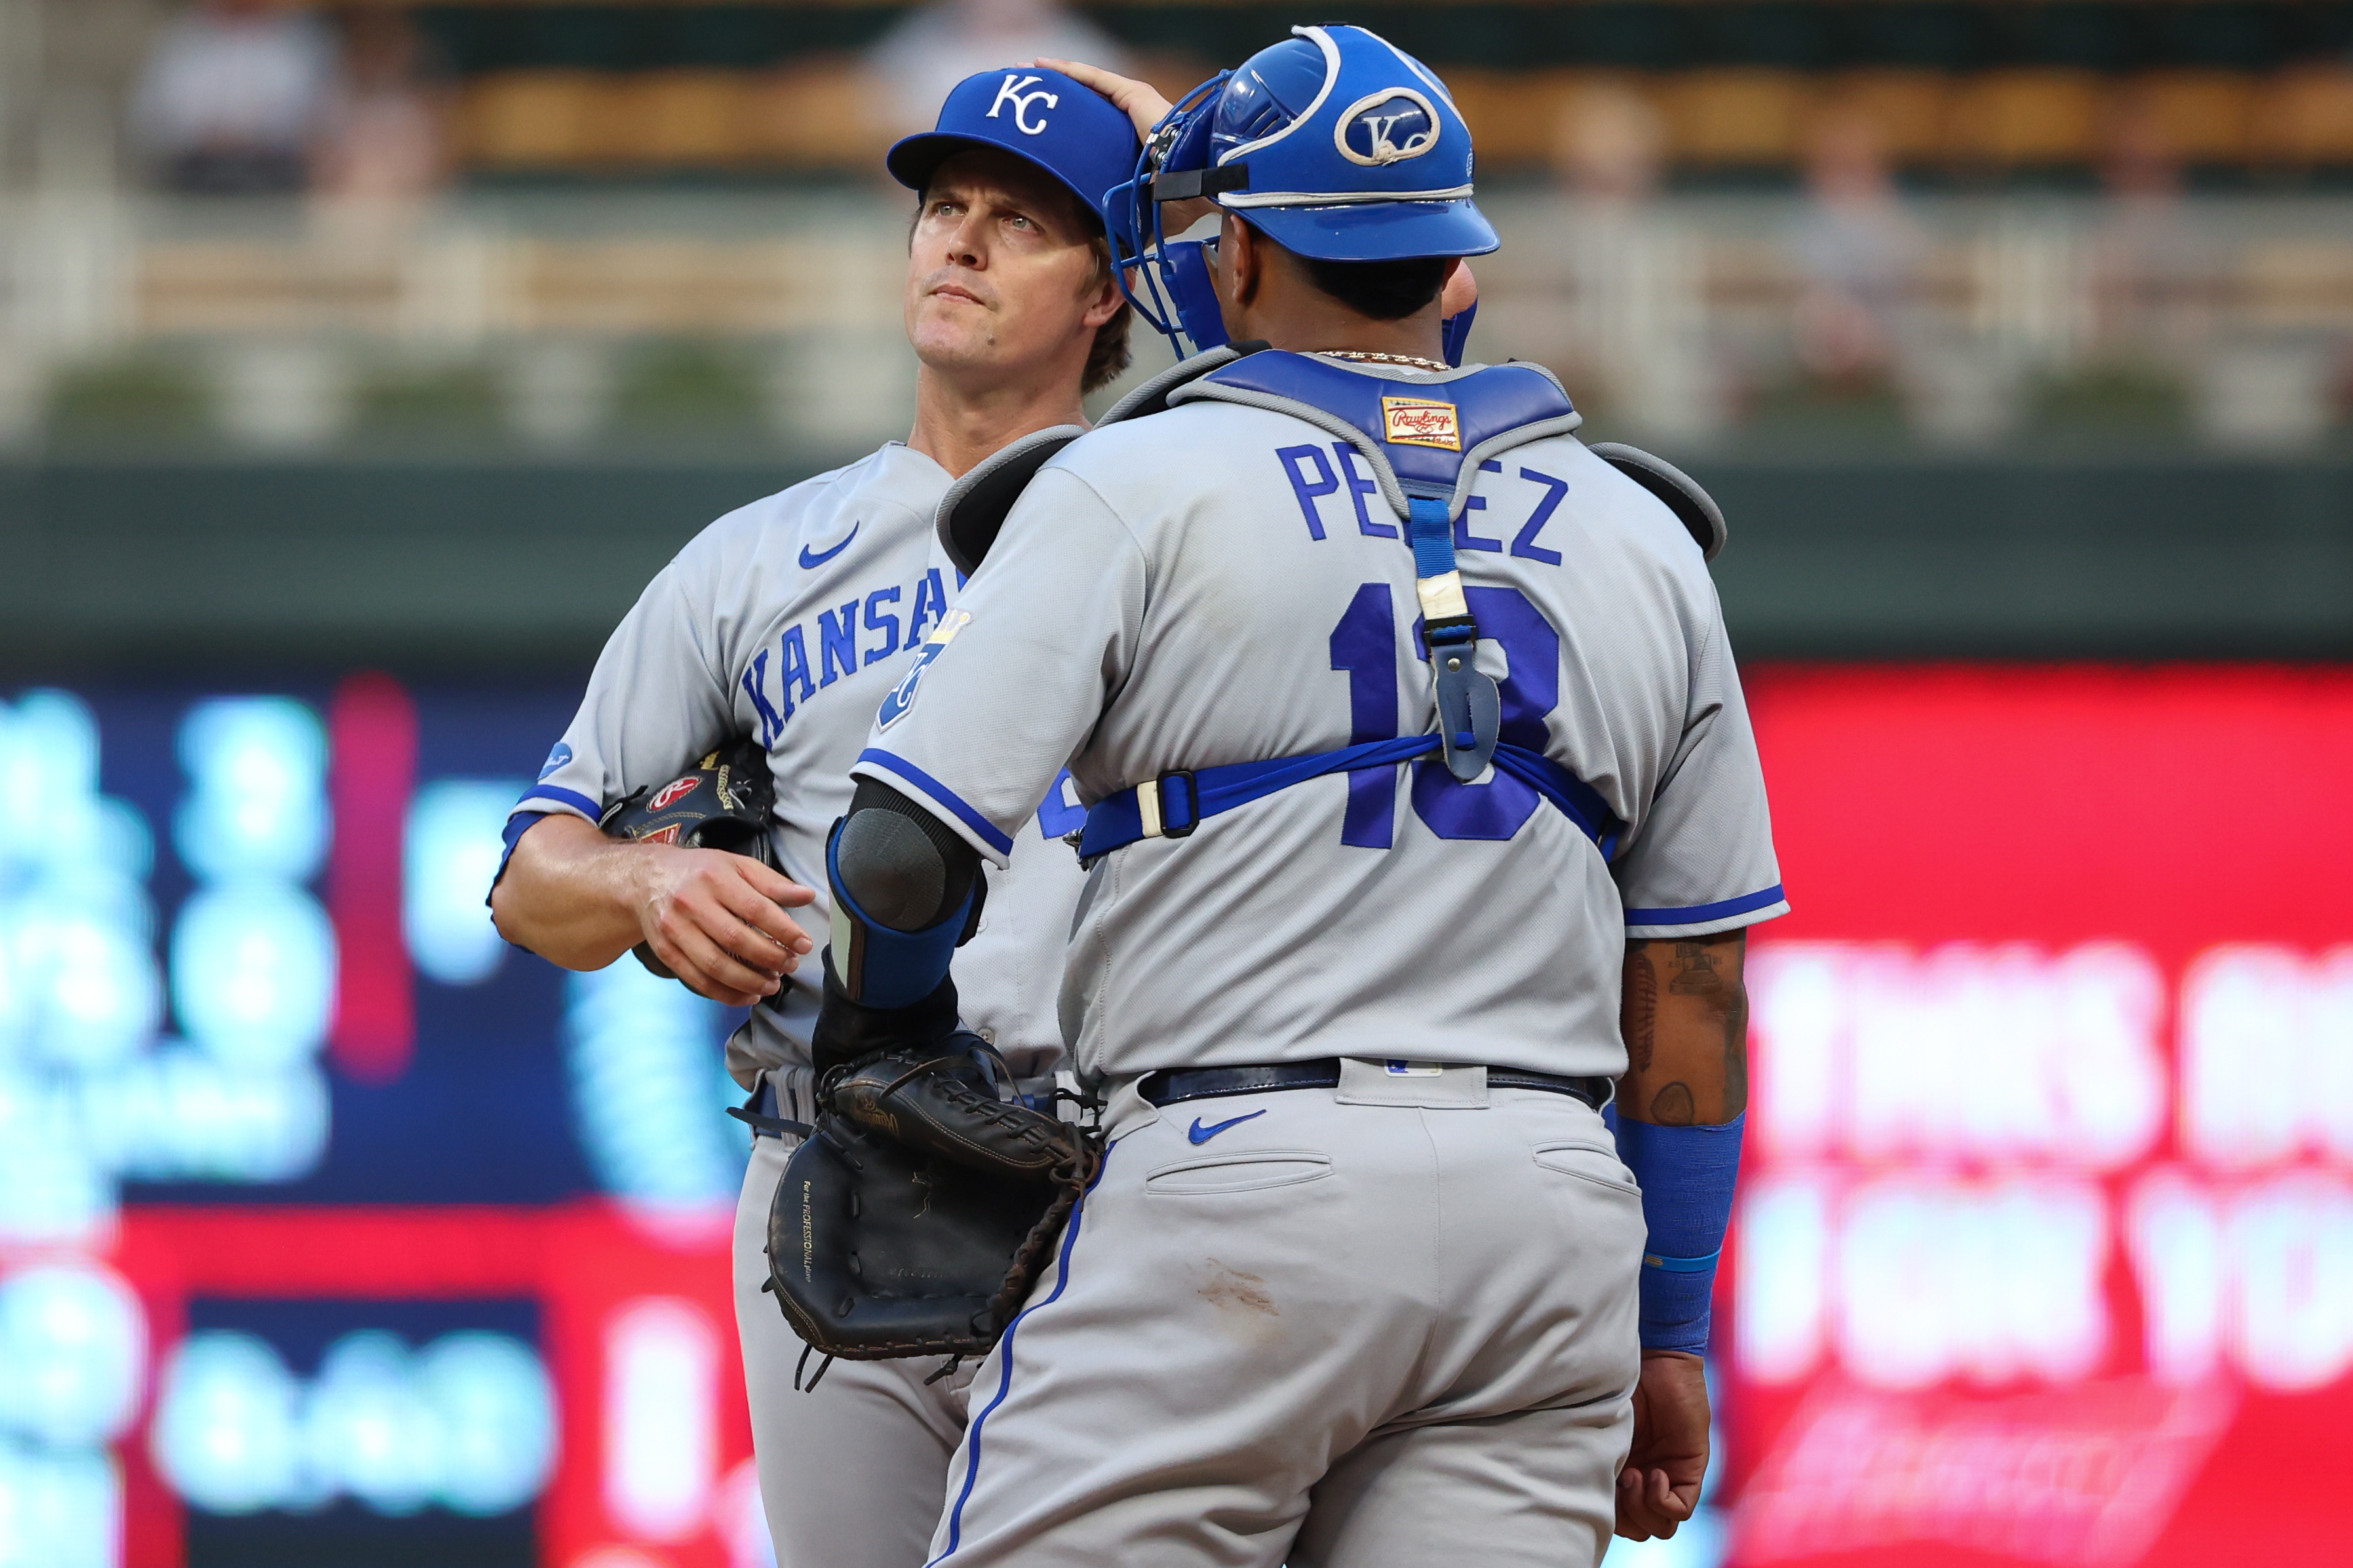 Salvador Perez #13 of the Kansas City Royals talks to Zack Greinke #23 against the Minnesota Twins during a mound visit in the first inning of the game at Target Field on September 14, 2022 in Minneapolis, Minnesota.